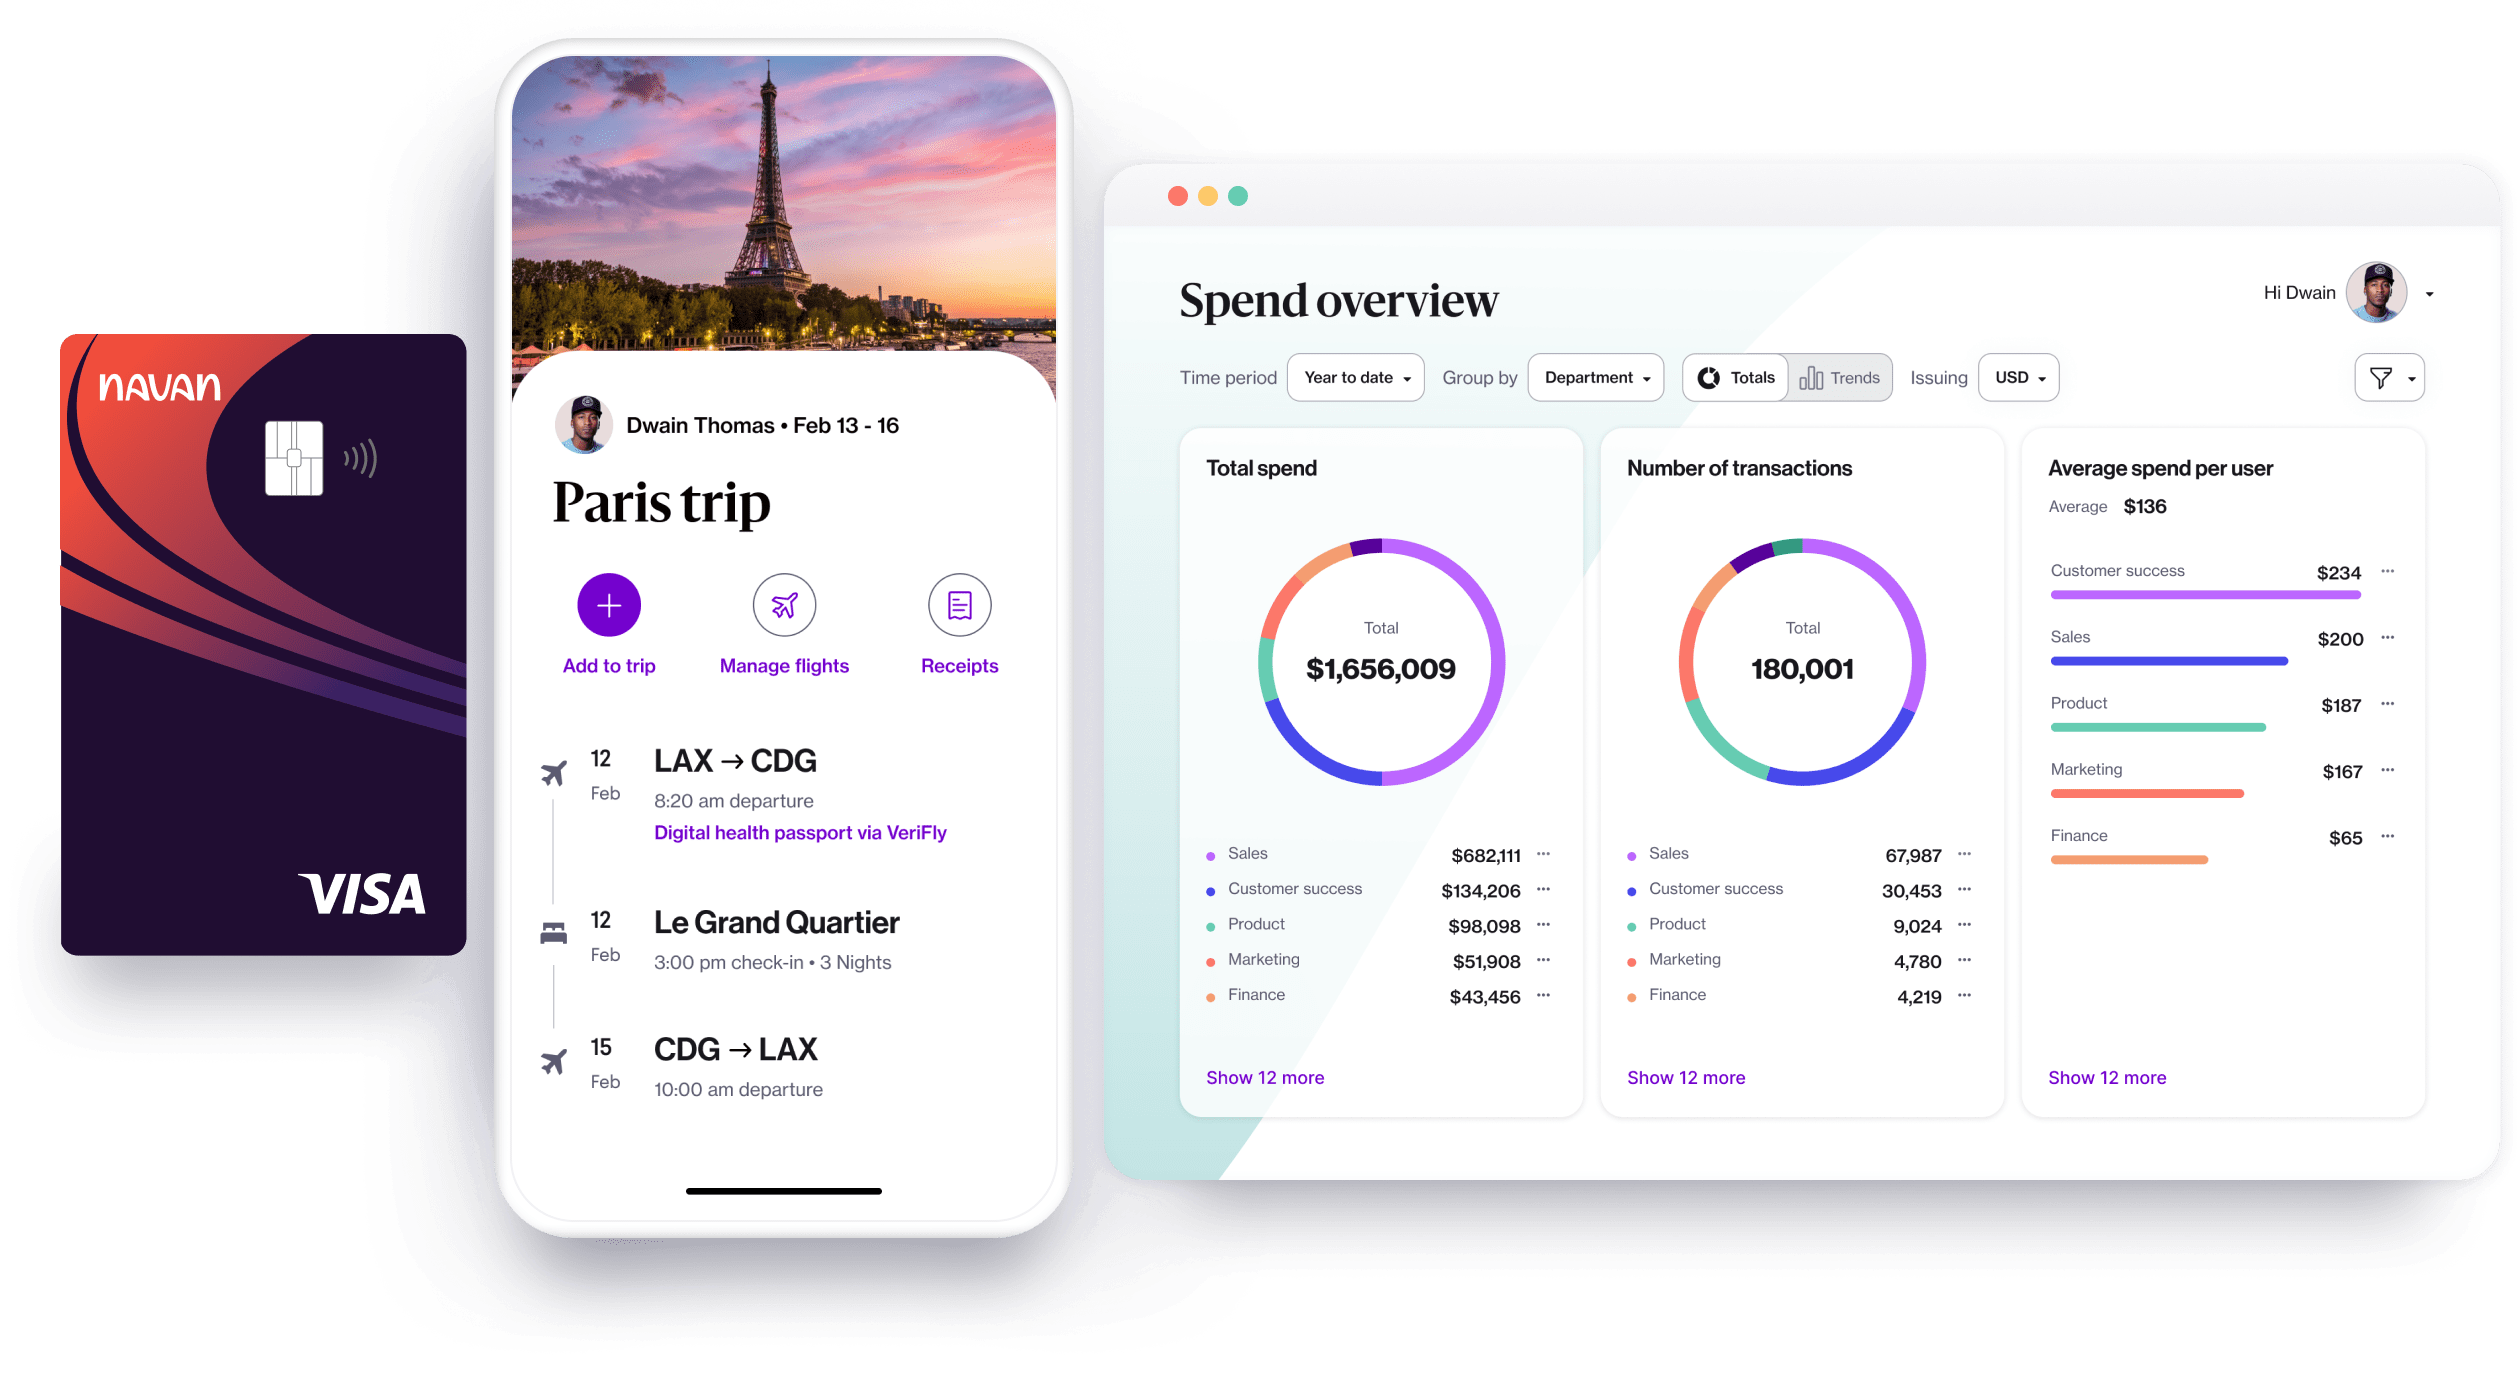 A collage view of a paris trip itinerary on the Navan mobile app, a complete expense spend overview using the Navan desktop app, and a Navan corporate card